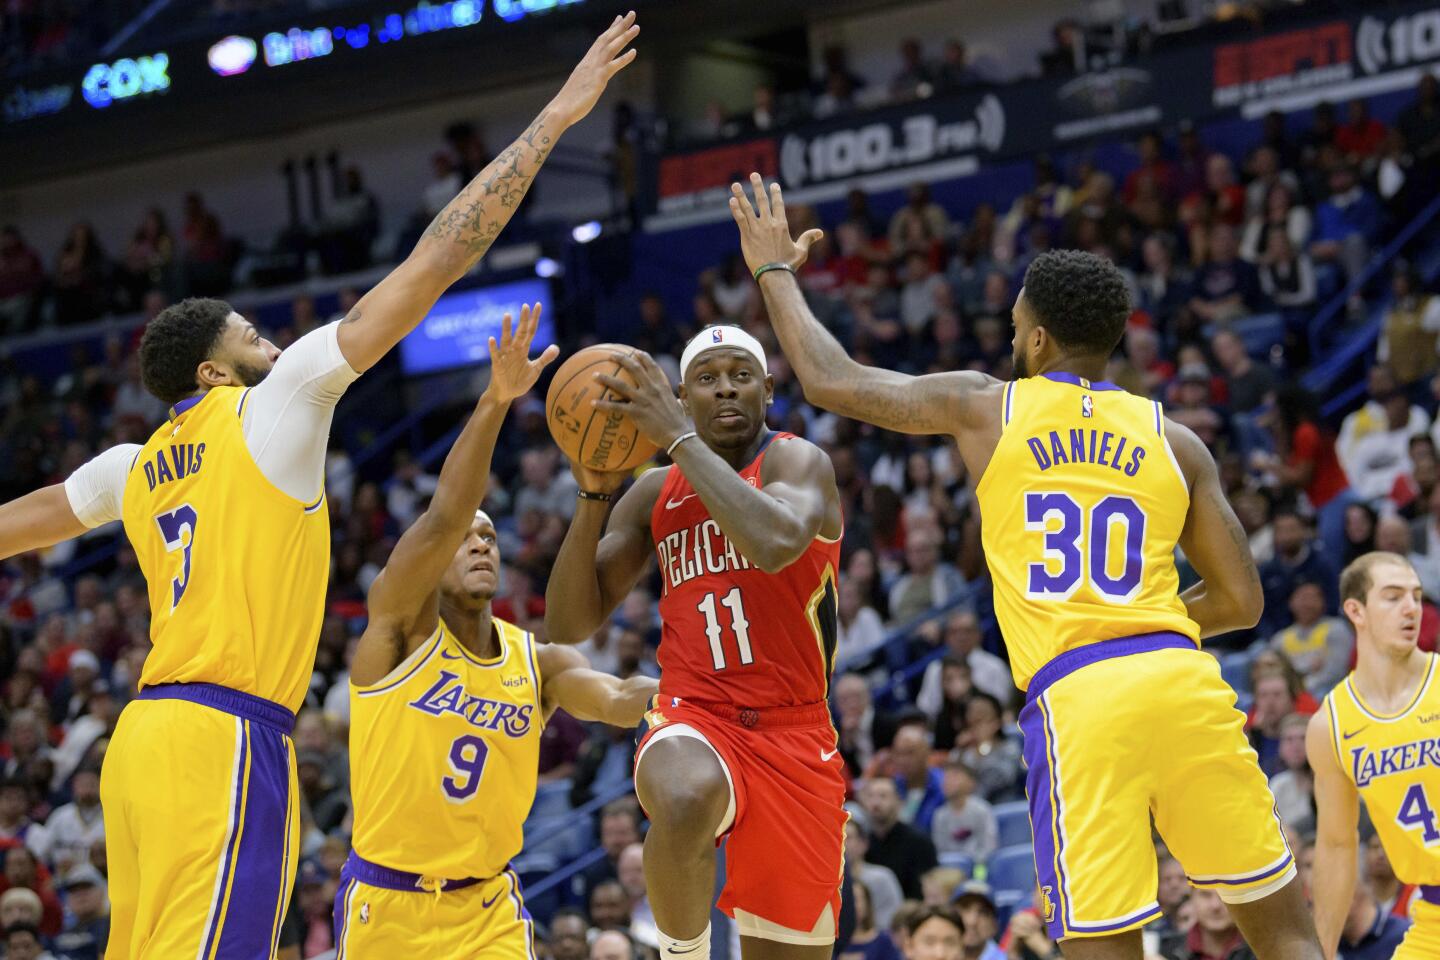 Pelicans guard Jrue Holiday (11) looks to shoot during a game against the Lakers on Nov. 27.